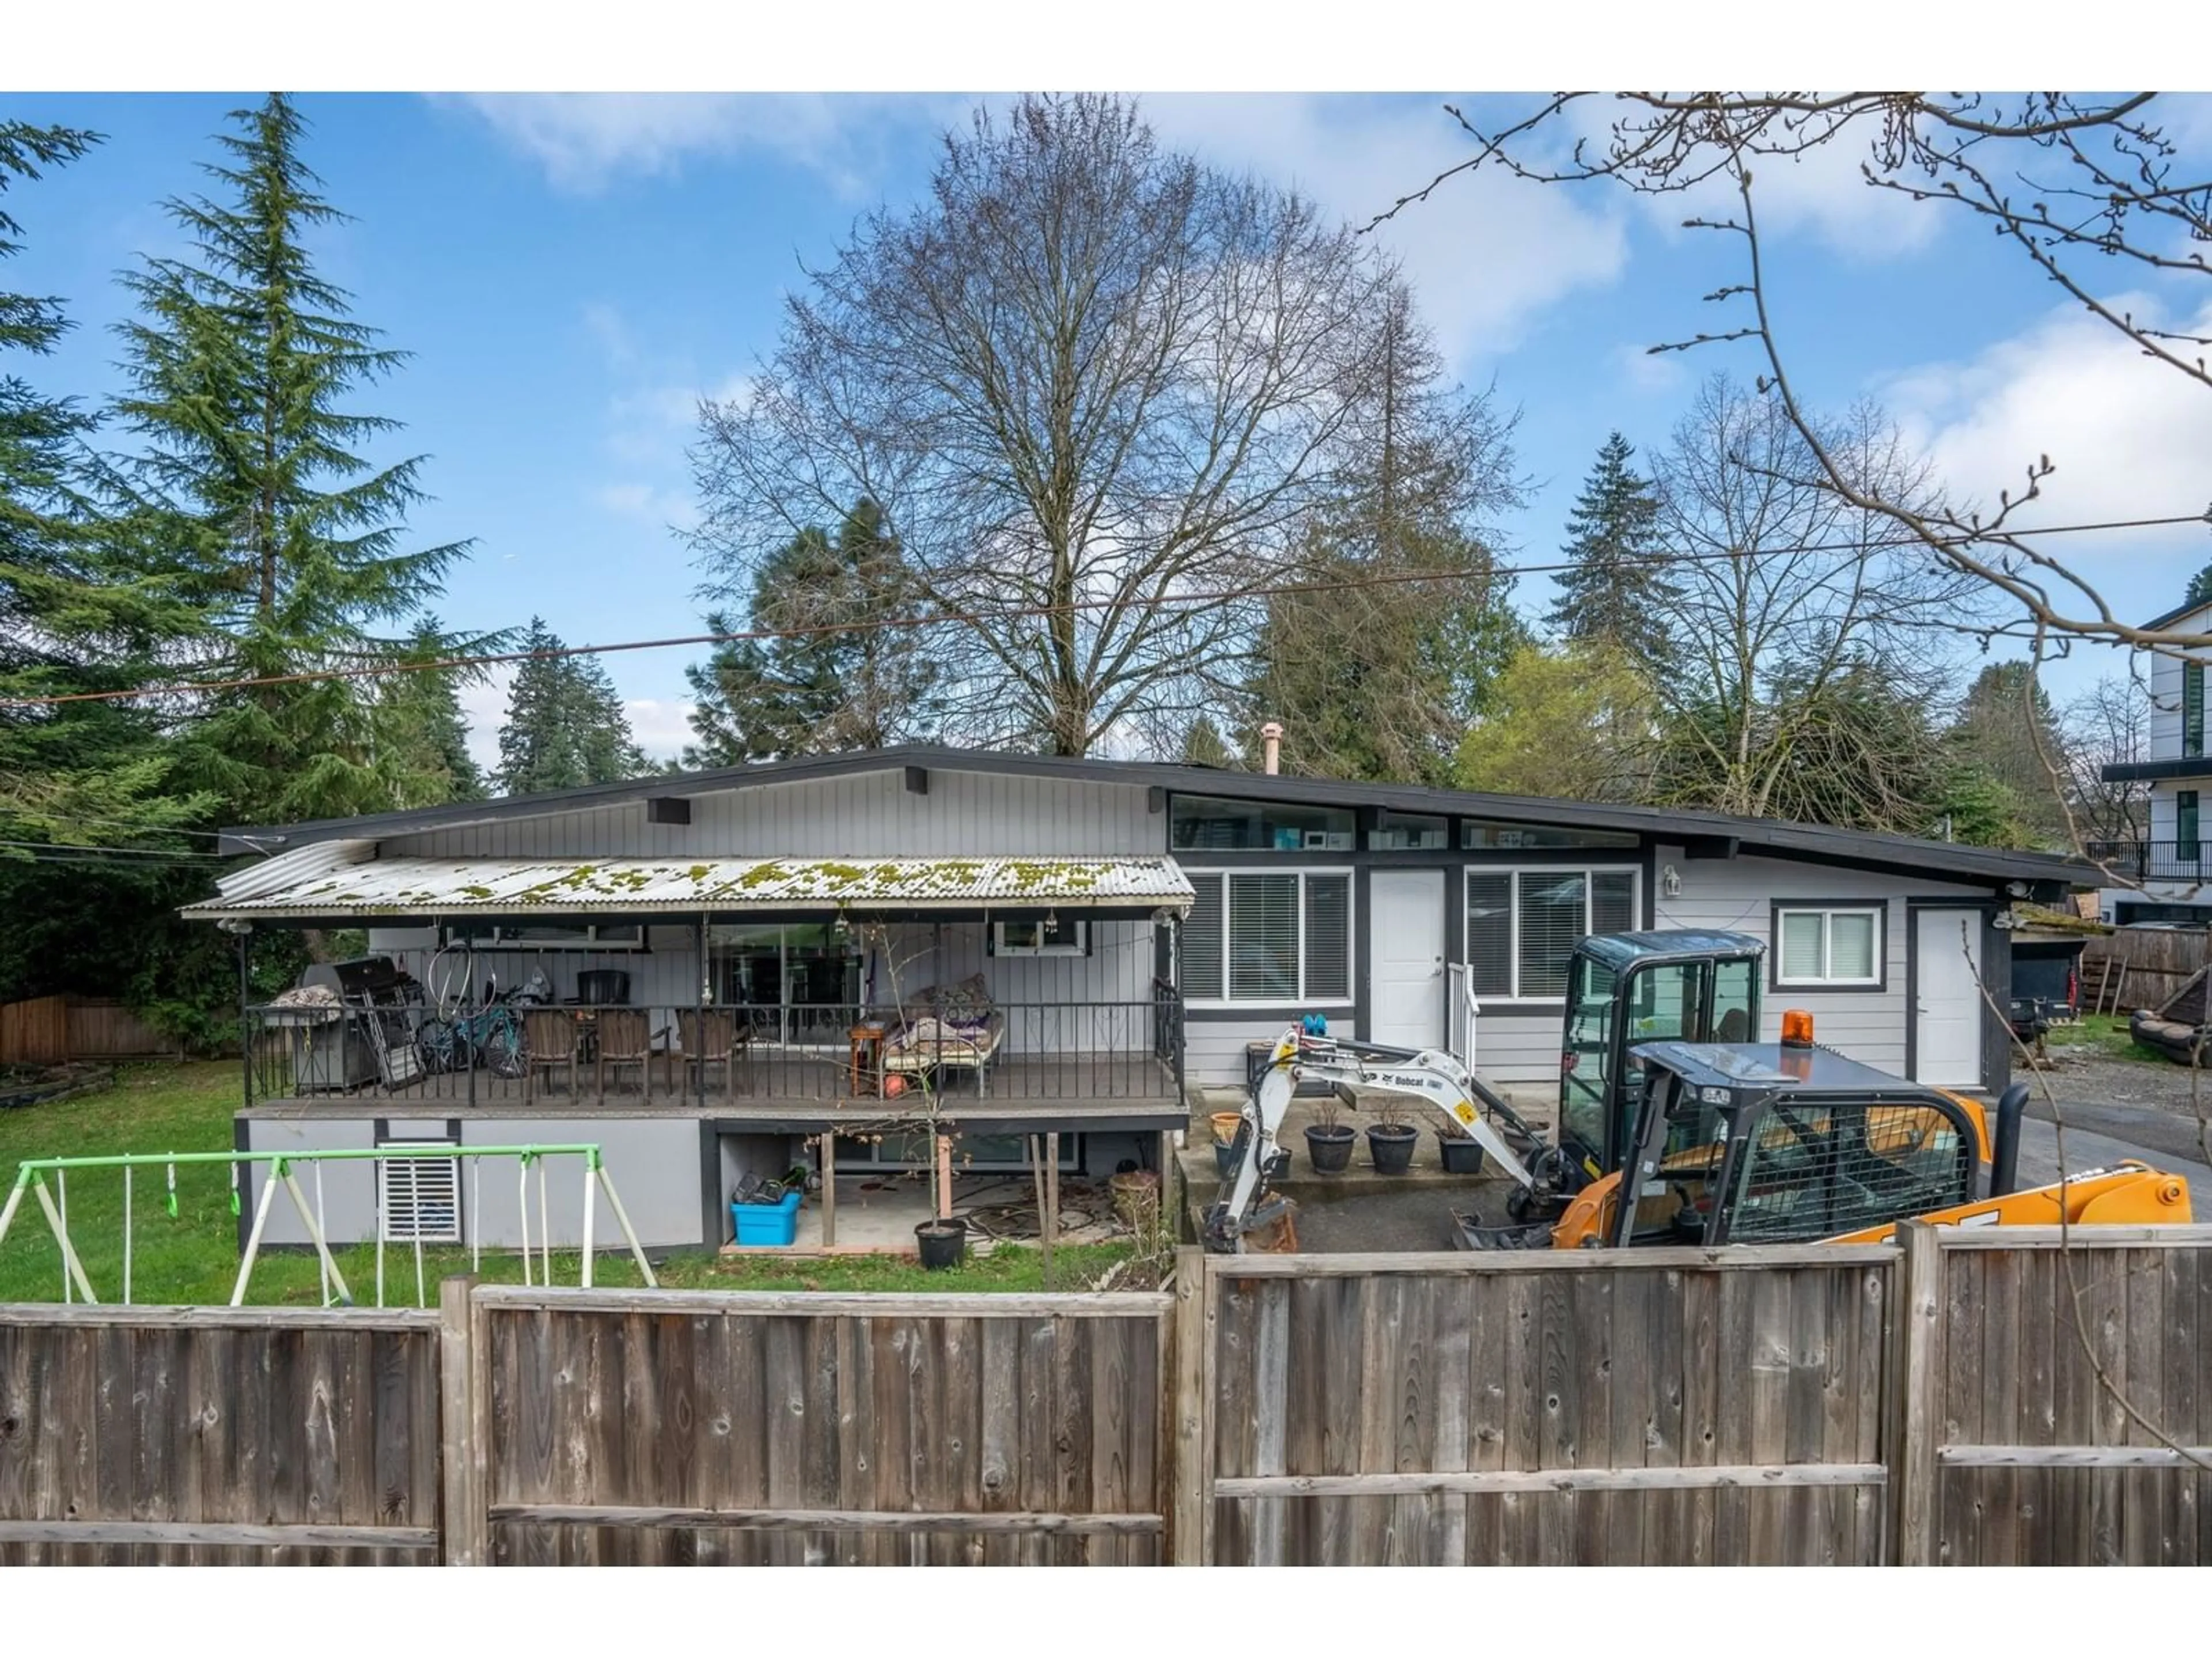 Frontside or backside of a home for 12847 106 AVENUE, Surrey British Columbia V3T2B9